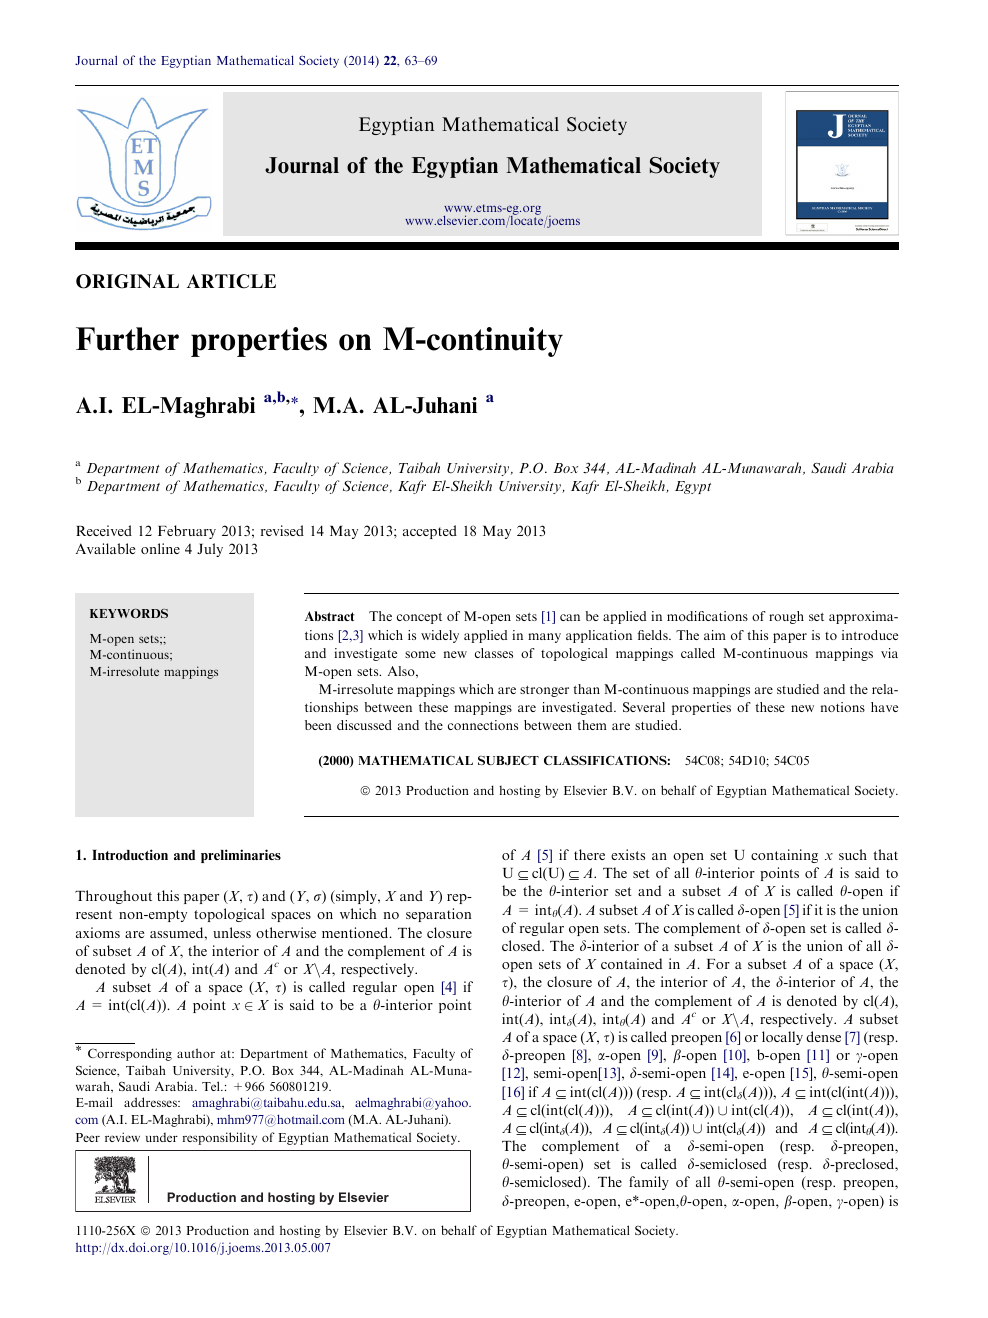 Further Properties On M Continuity Topic Of Research Paper In Mathematics Download Scholarly Article Pdf And Read For Free On Cyberleninka Open Science Hub